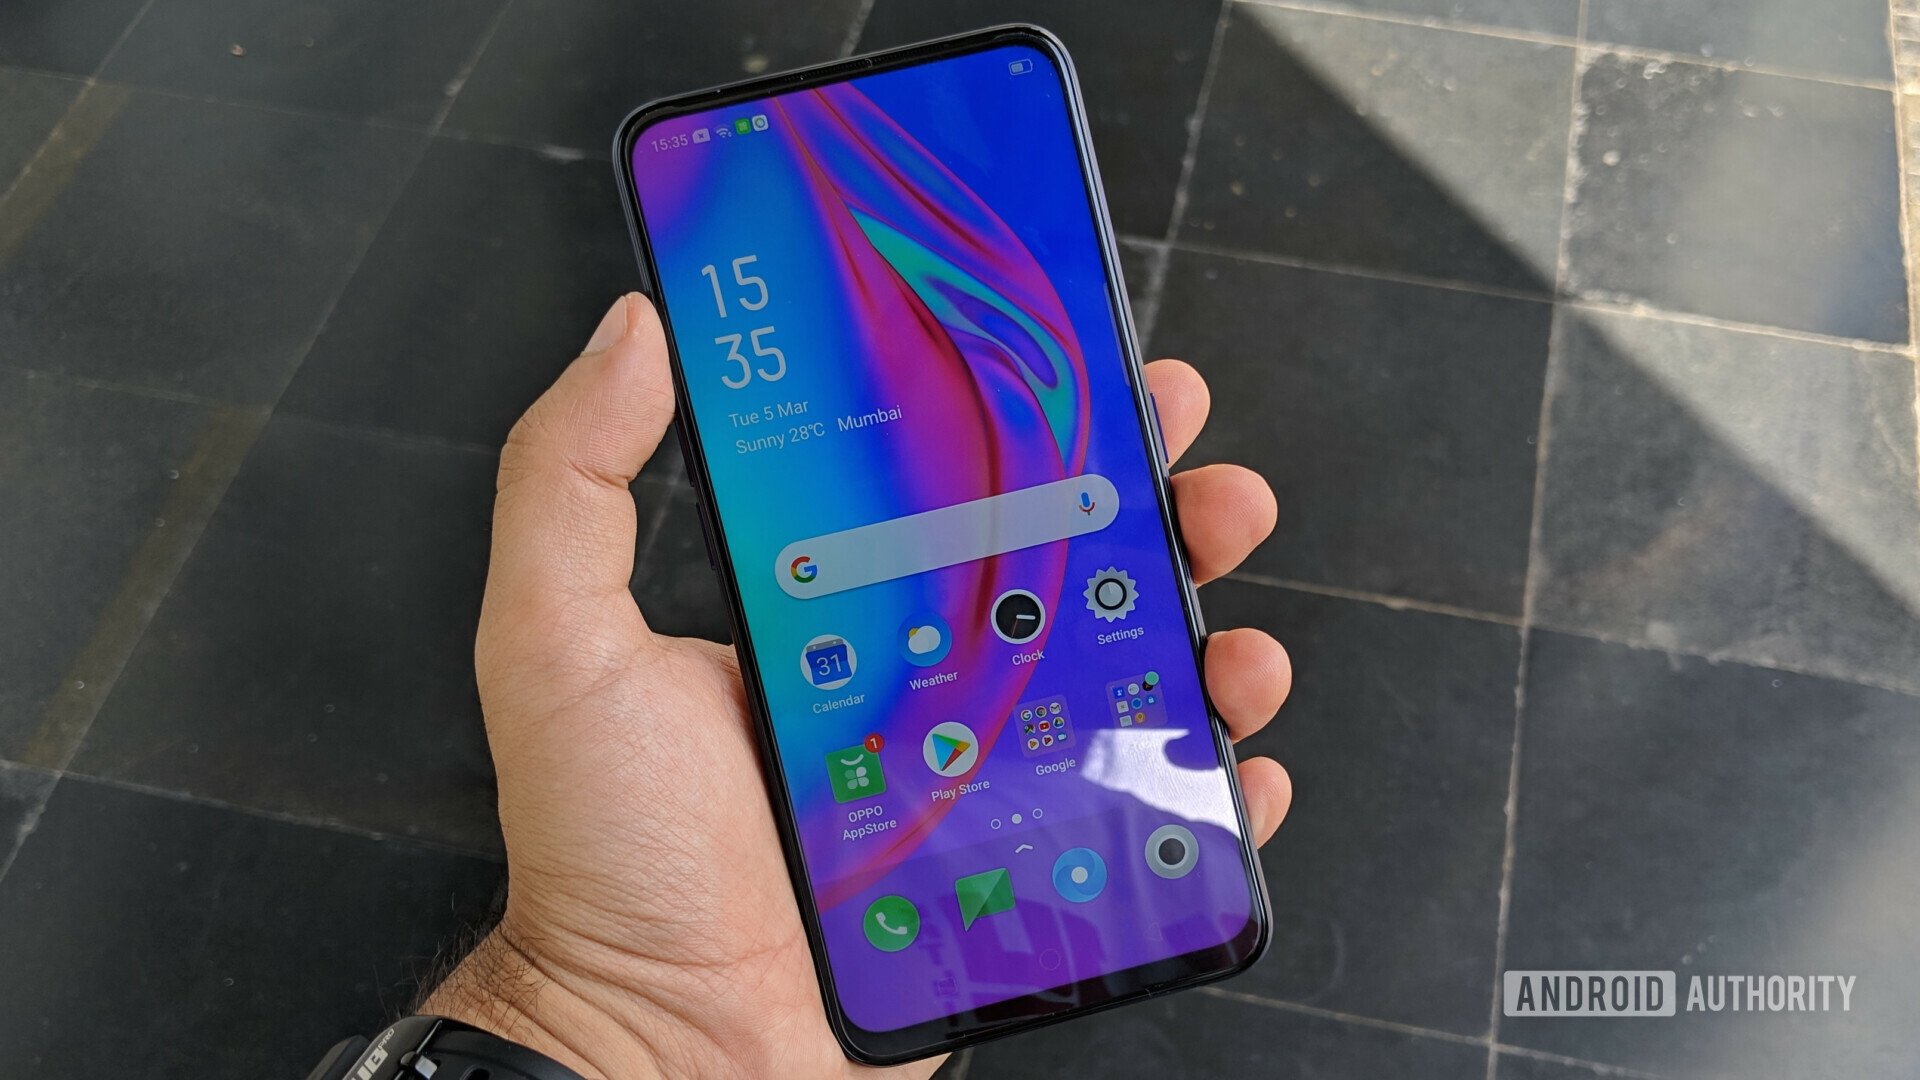 Front side of the OPPO F11 Pro held in a hand with the display turned on showing the default homescreen.